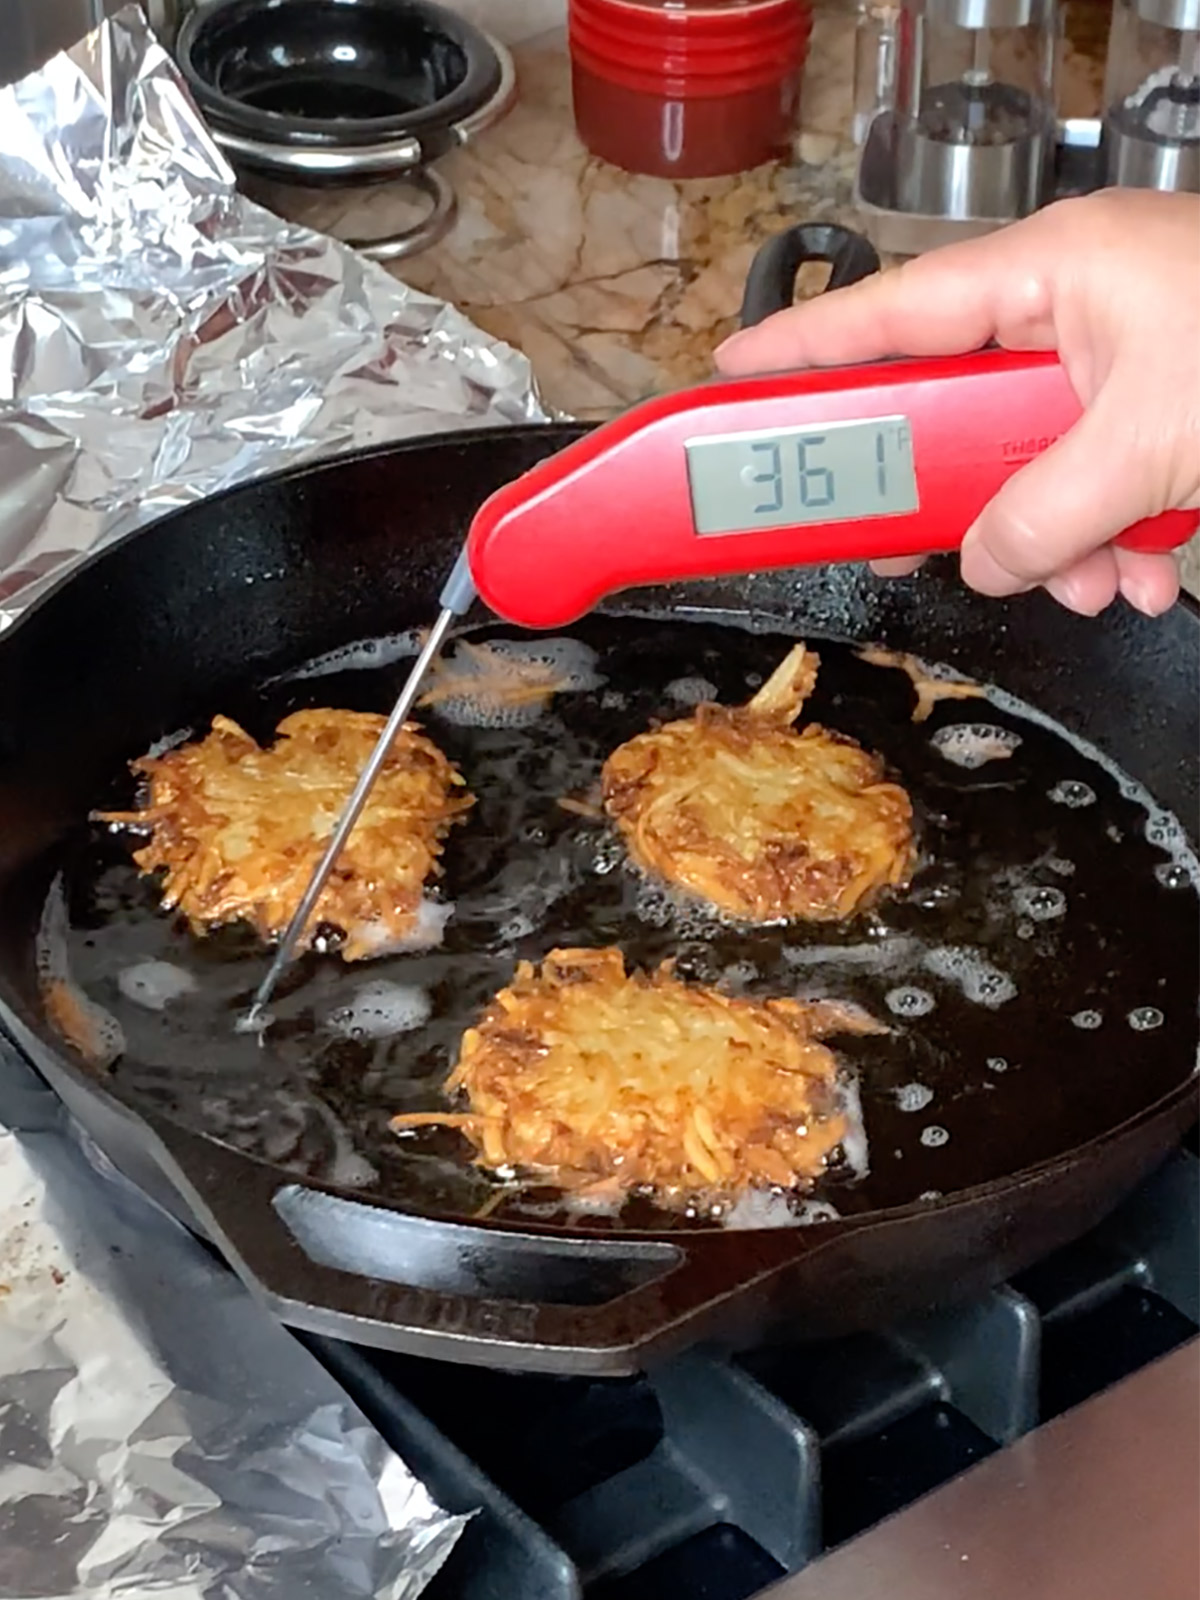 Taking temperature of oil in the frying pan for the crispy latkes.